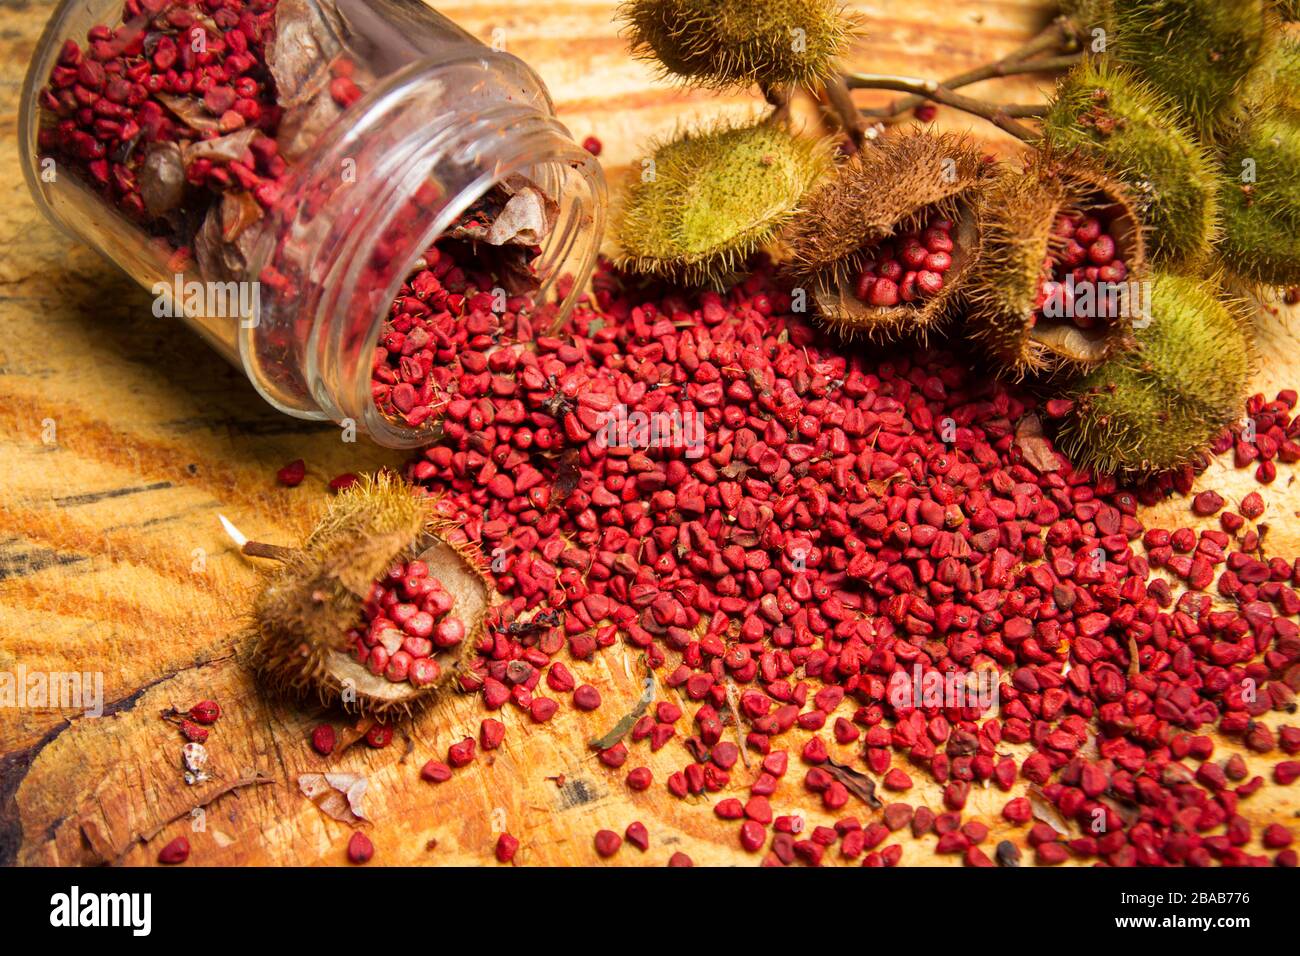 red annatto seed condiment and food coloring on wooded table Stock Photo